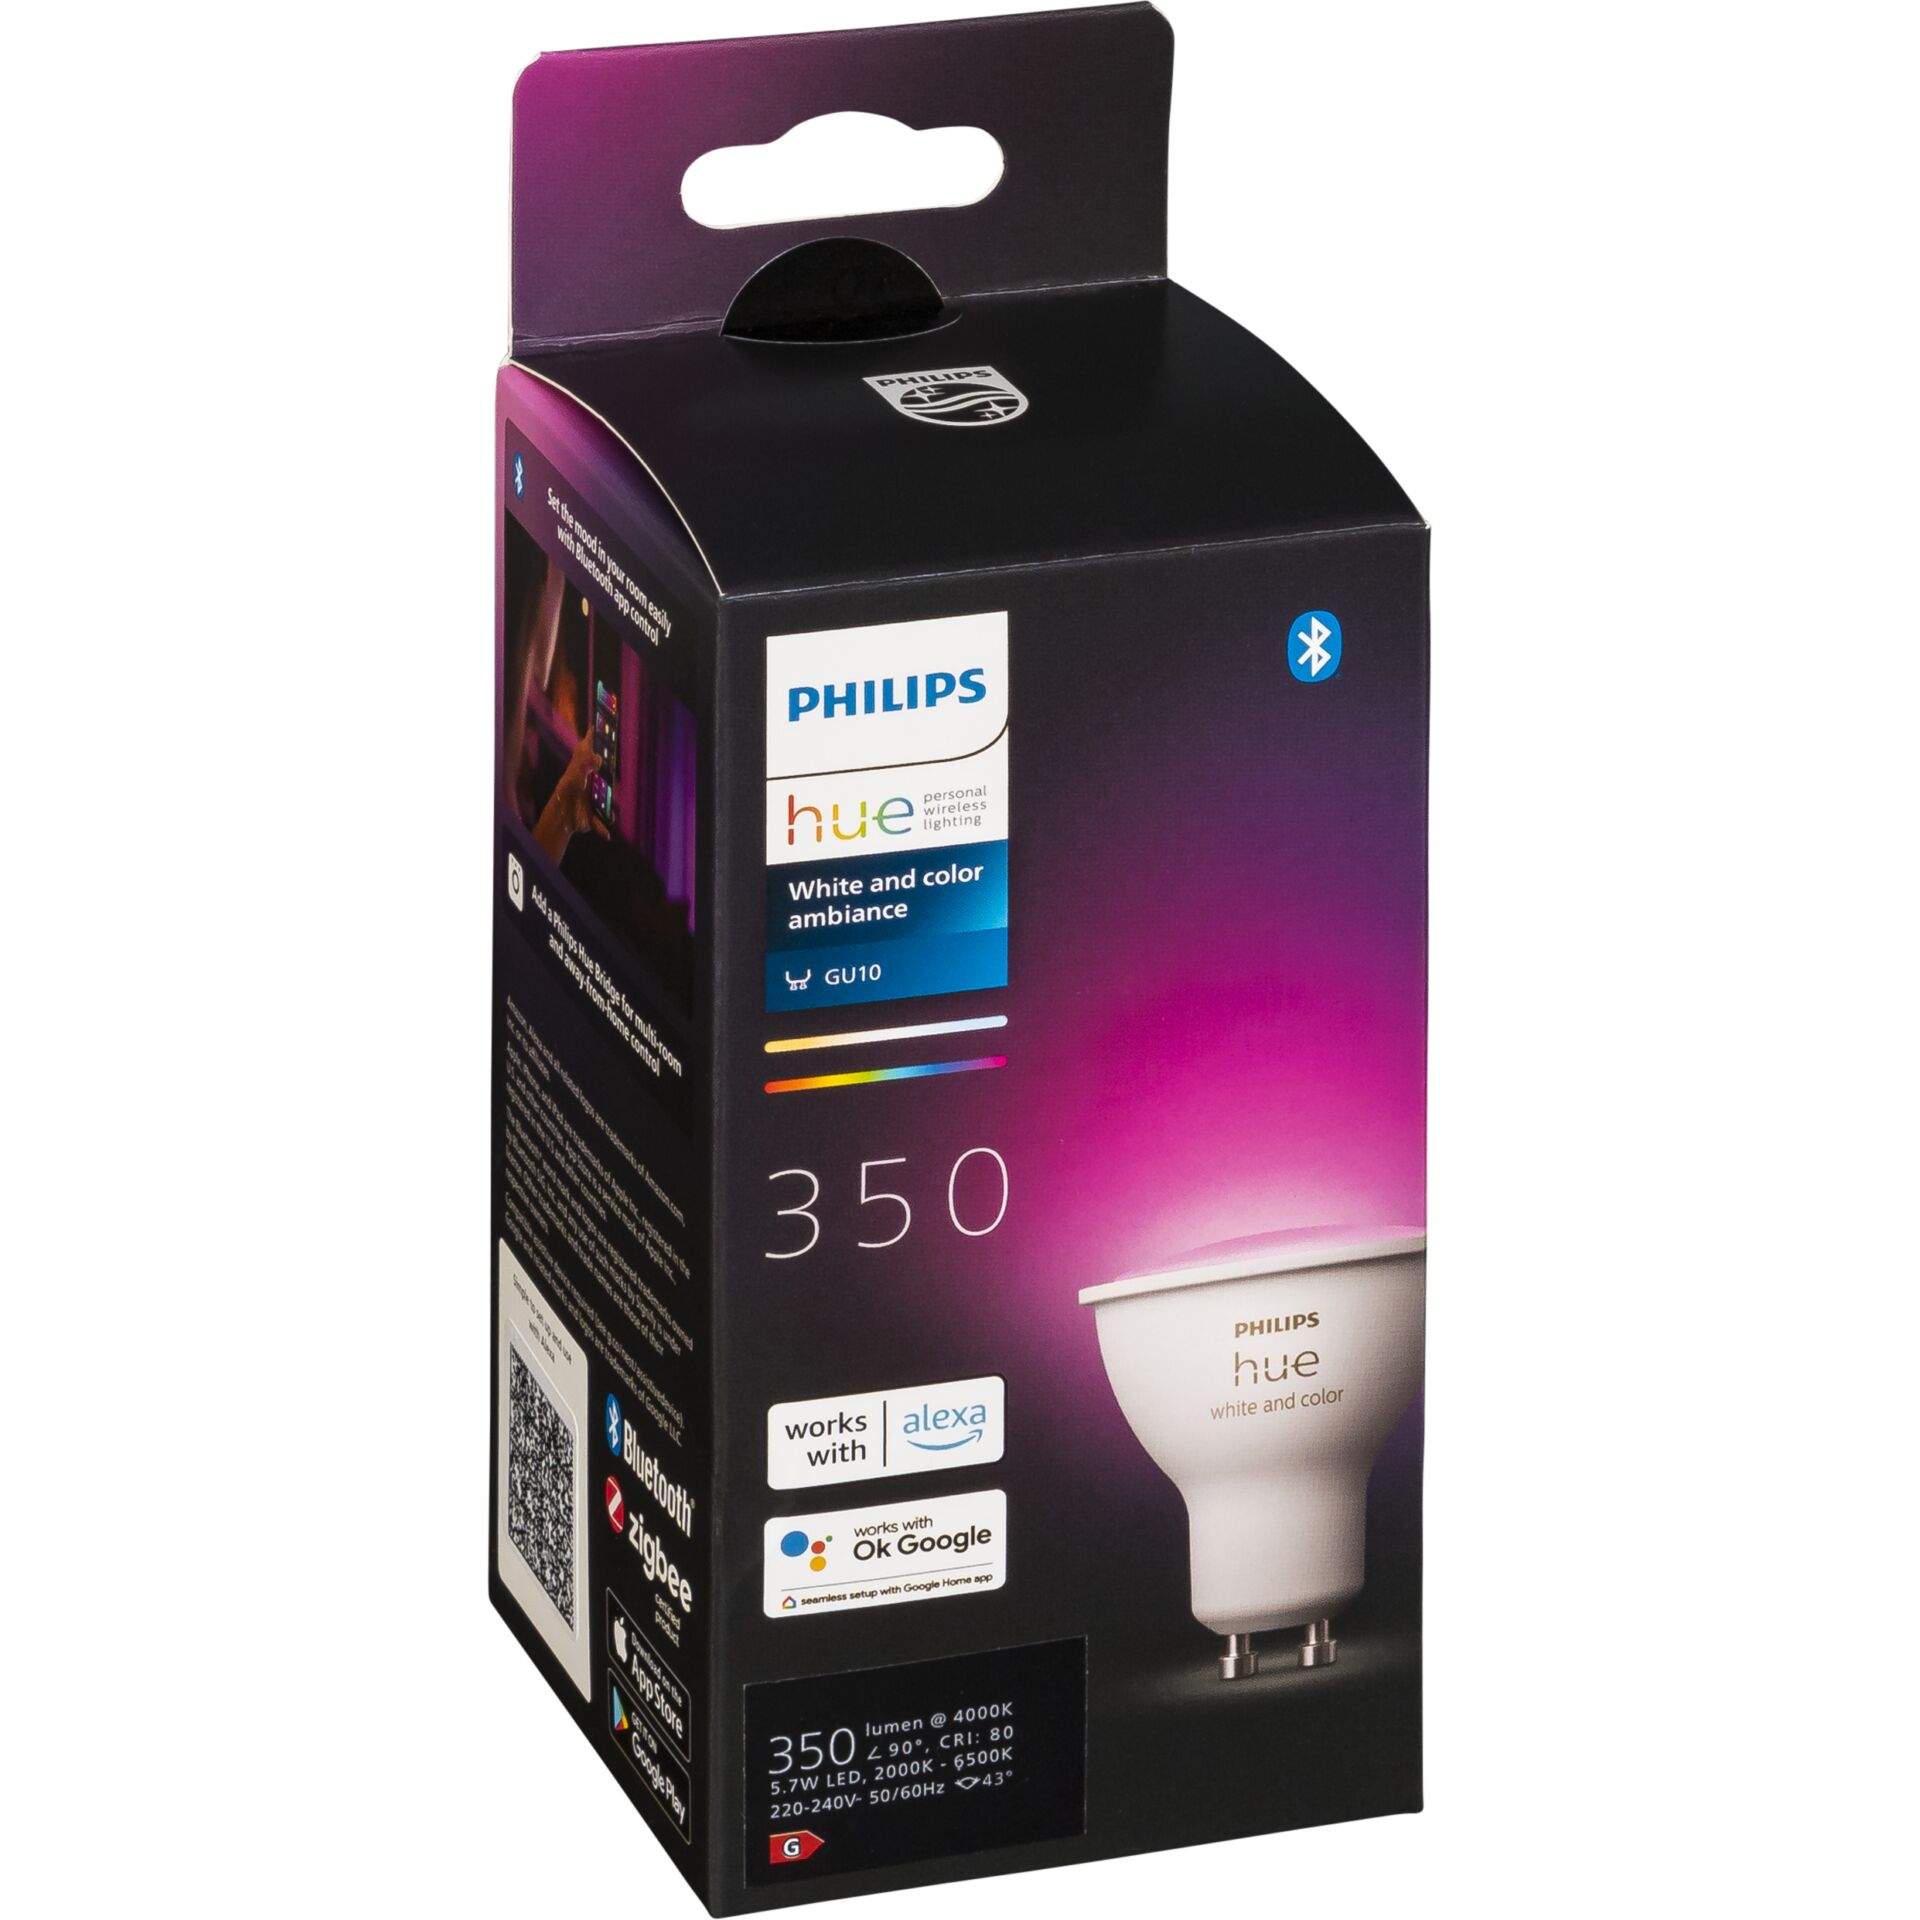 Philips Hue White and Color ambiance GU10 - Smarter Spot - 350